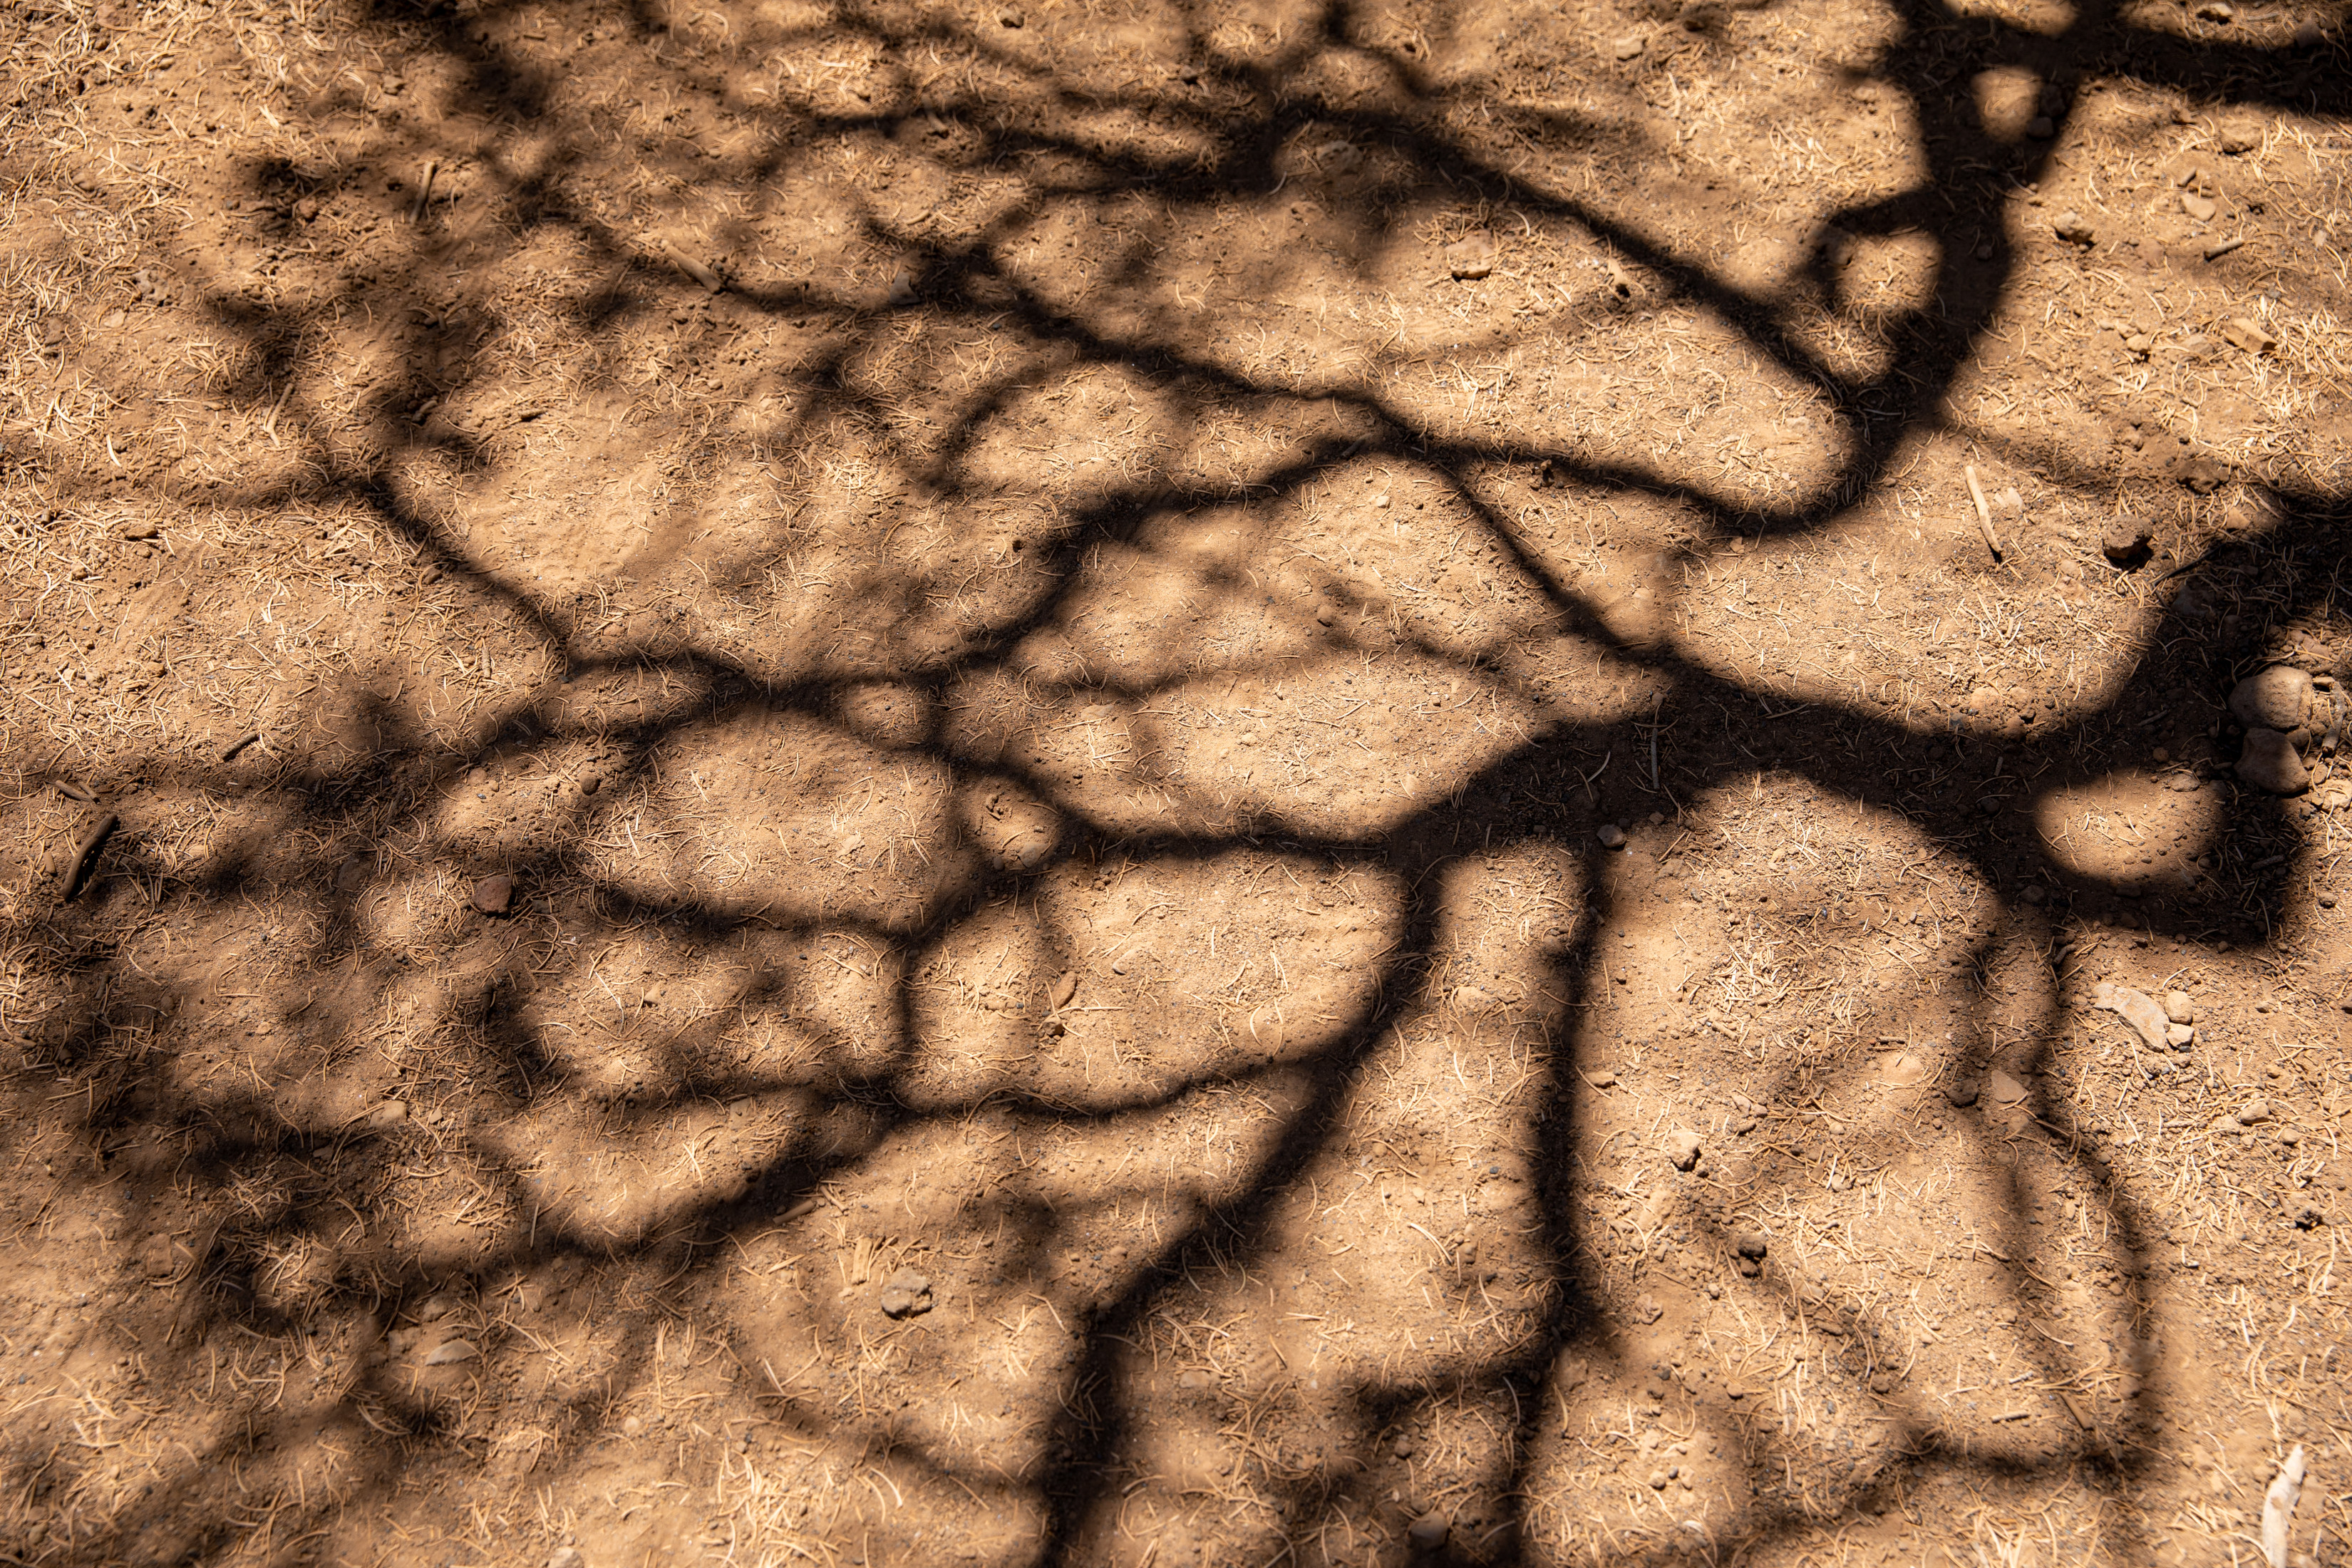 Shadows from trees cast onto dirt ground.